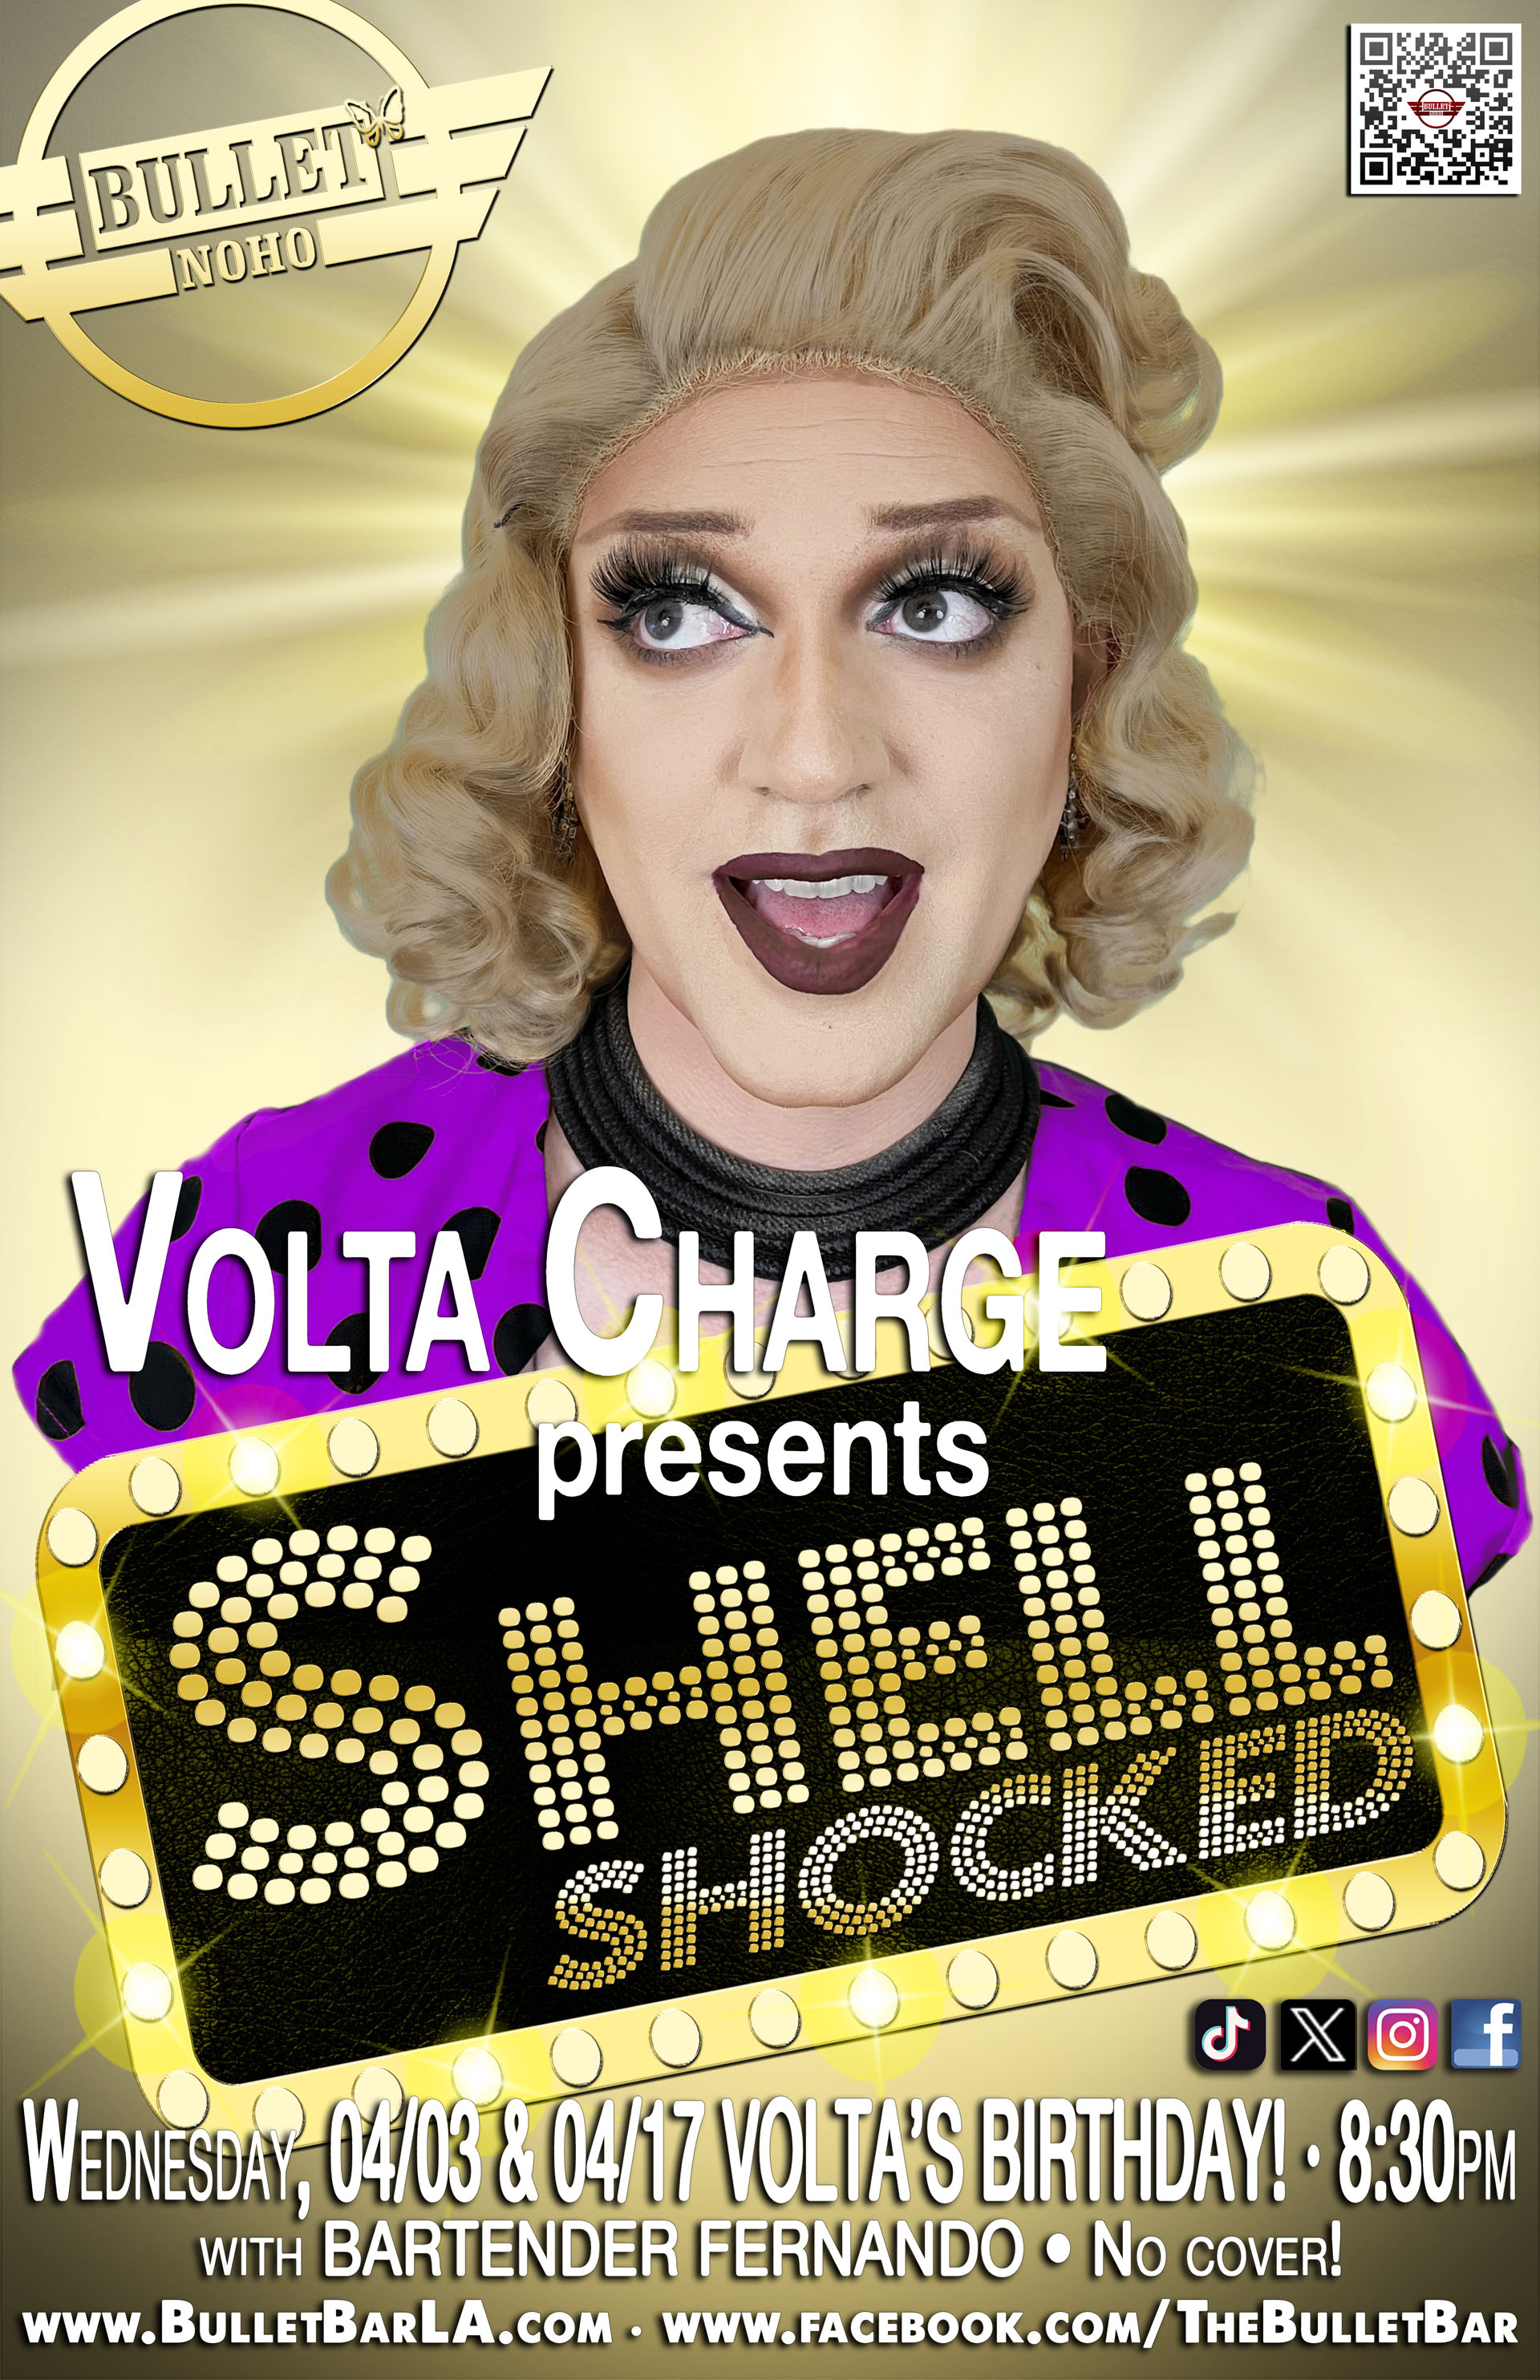 THE BULLET BAR & VOLTA CHARGE Presents SHELL SHOCKED: Wednesday, 04/03/24 at 8:30 PM! No Cover!